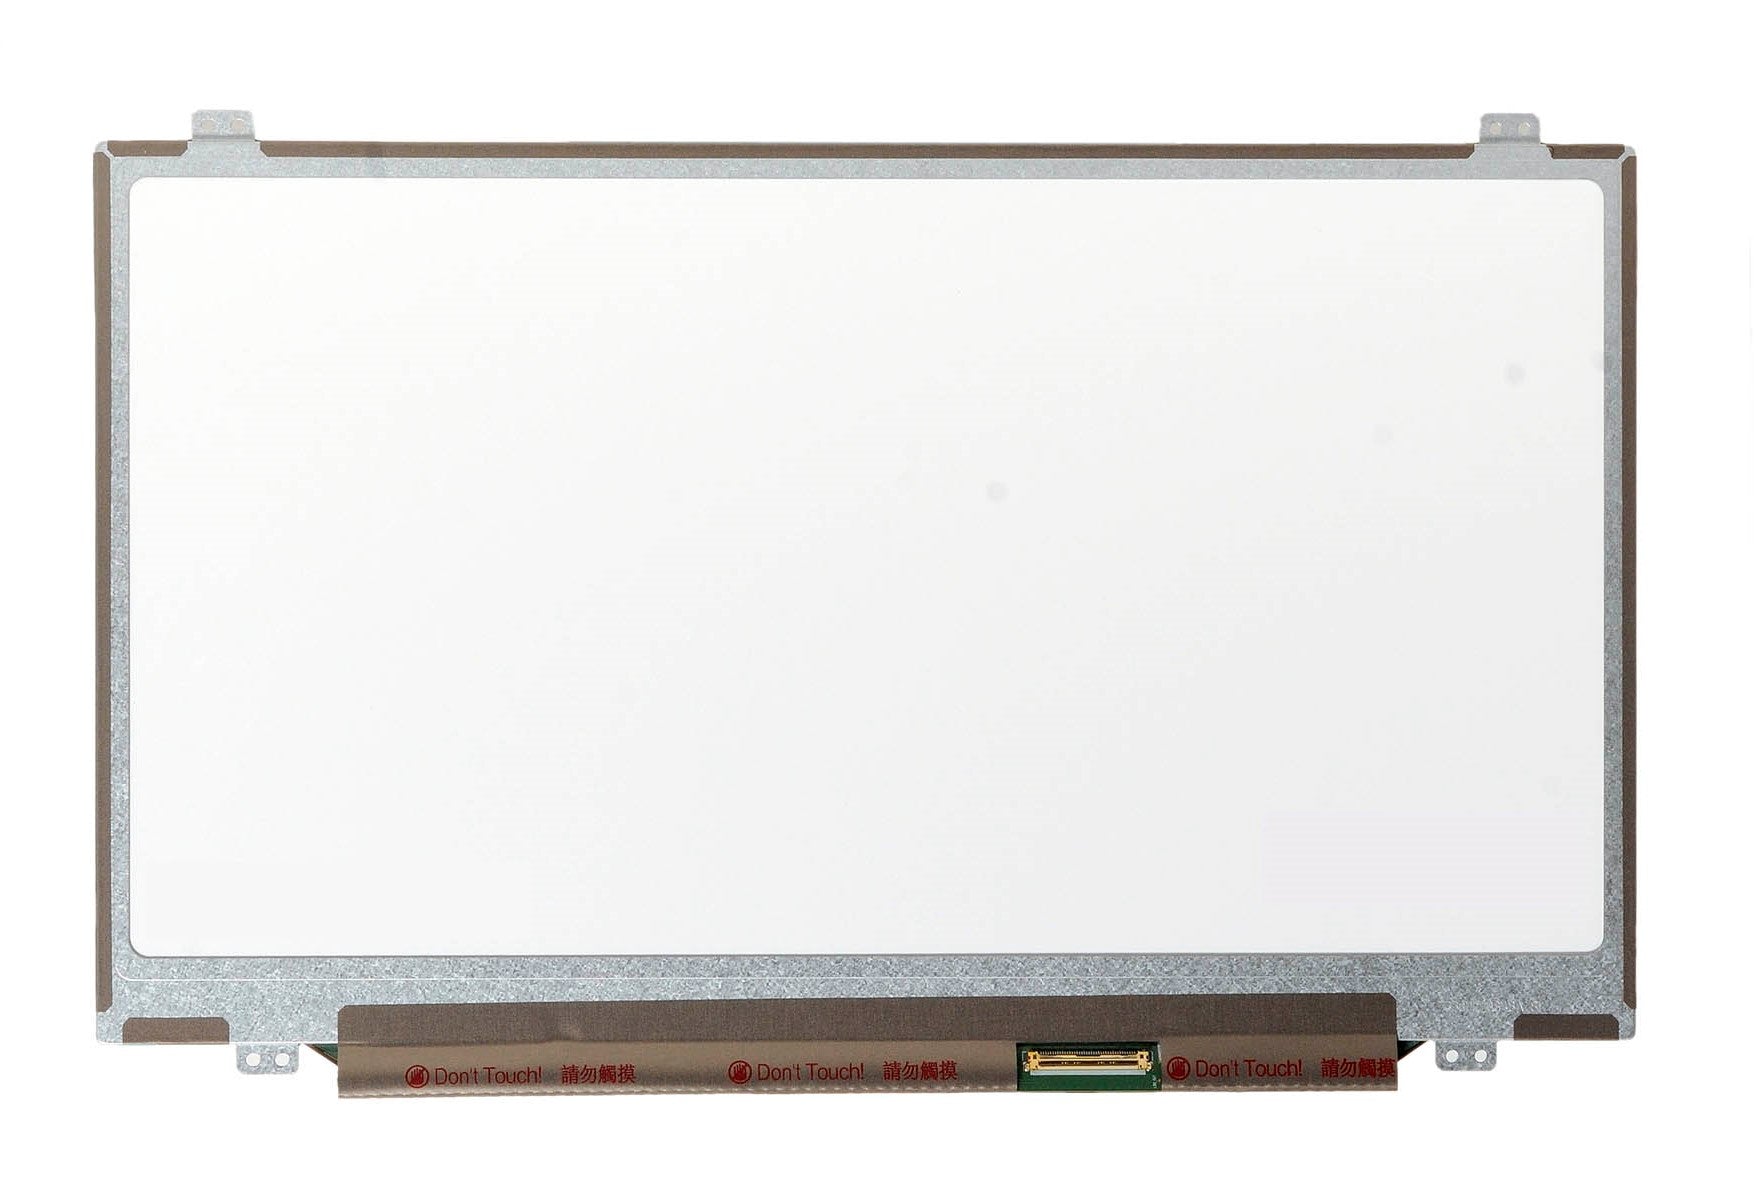 Replacement Screen For Acer Aspire V5-471 MS2360 HD 1366x768 Glossy LCD LED Display